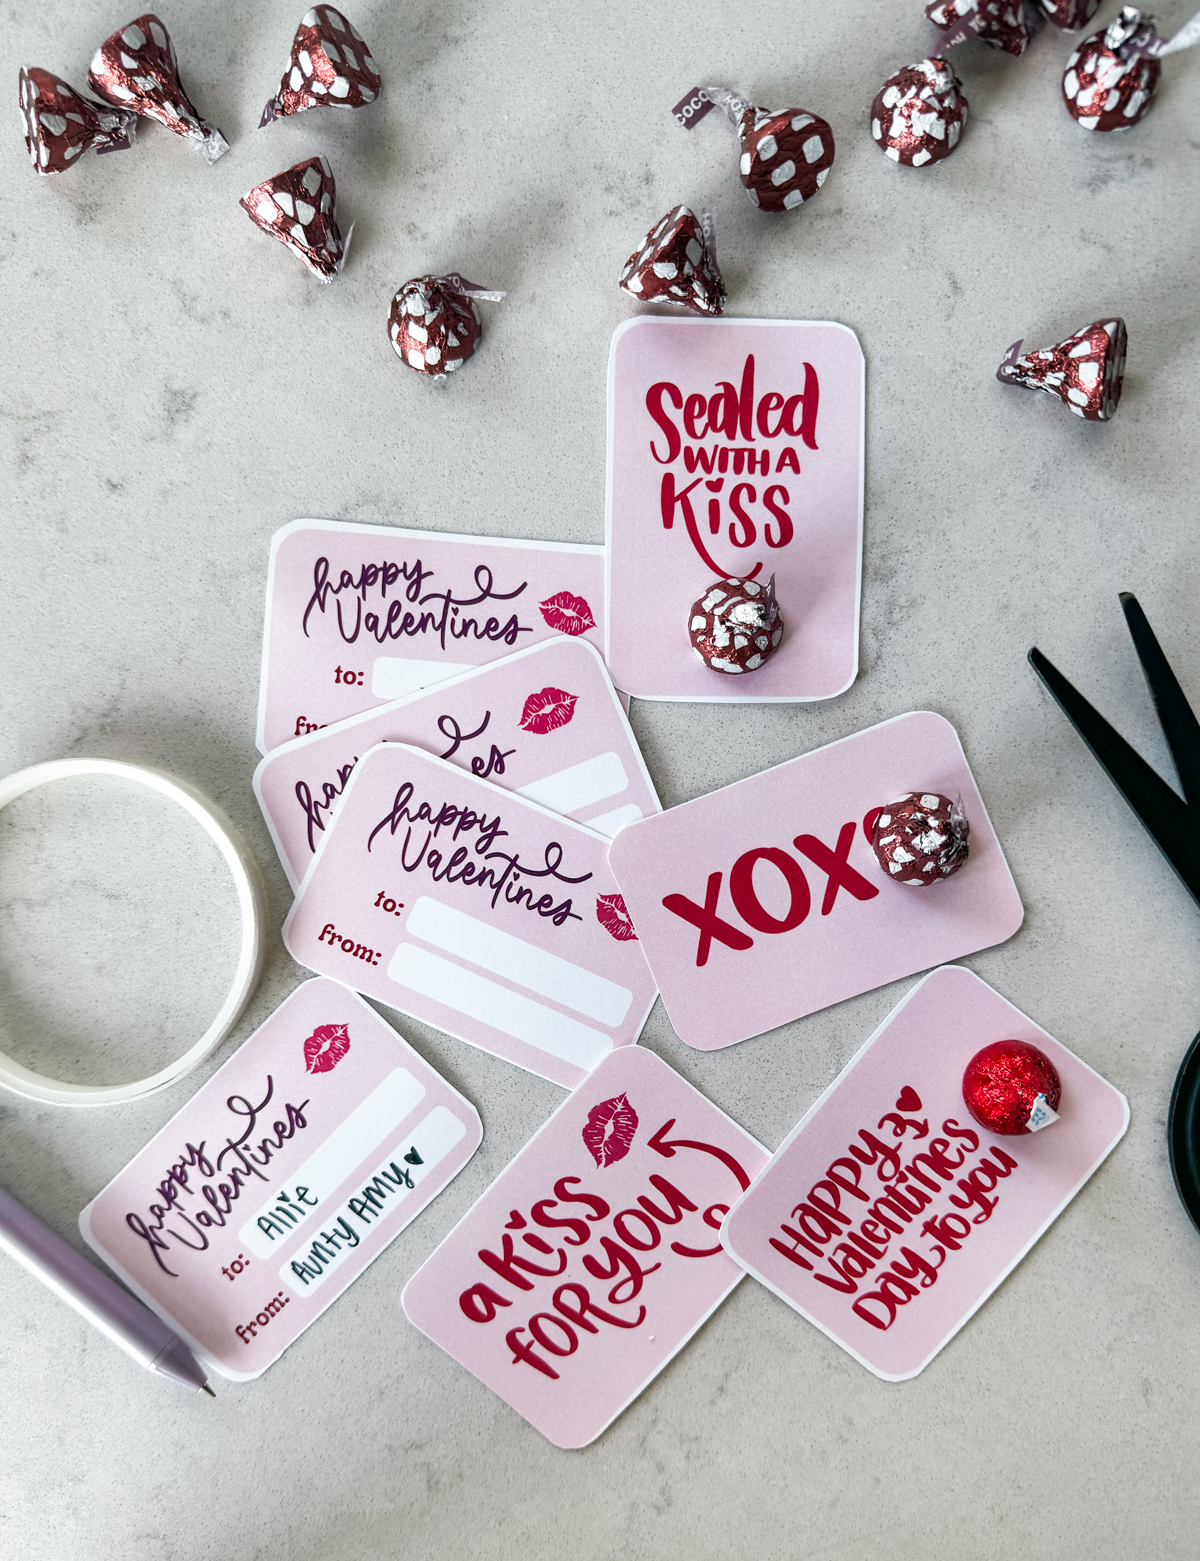 free printable valentines cards with pink backgrounds and red hand lettering, styled on marble countertop with black scissors, hershey's kisses, a purple pen and double sided tape